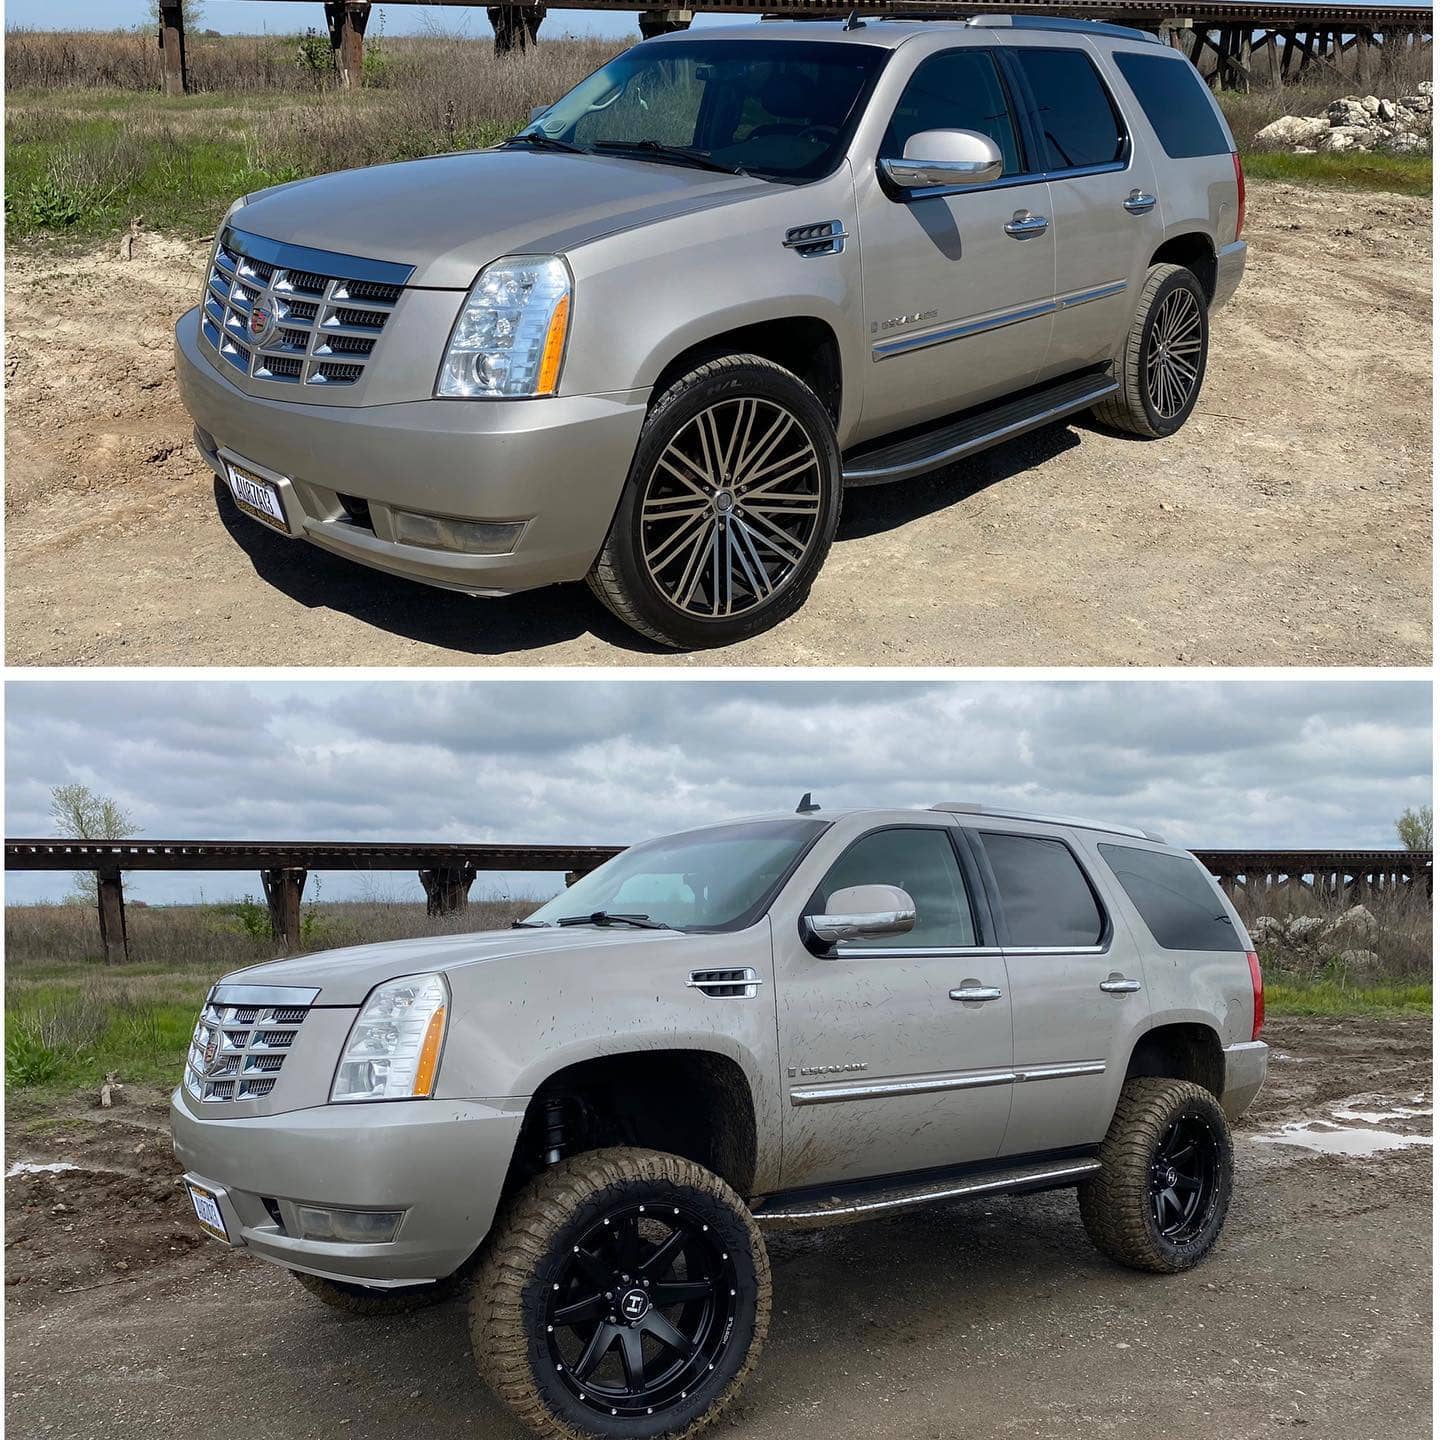 Cadillac Escalade GMT900 Without lift vs With lift